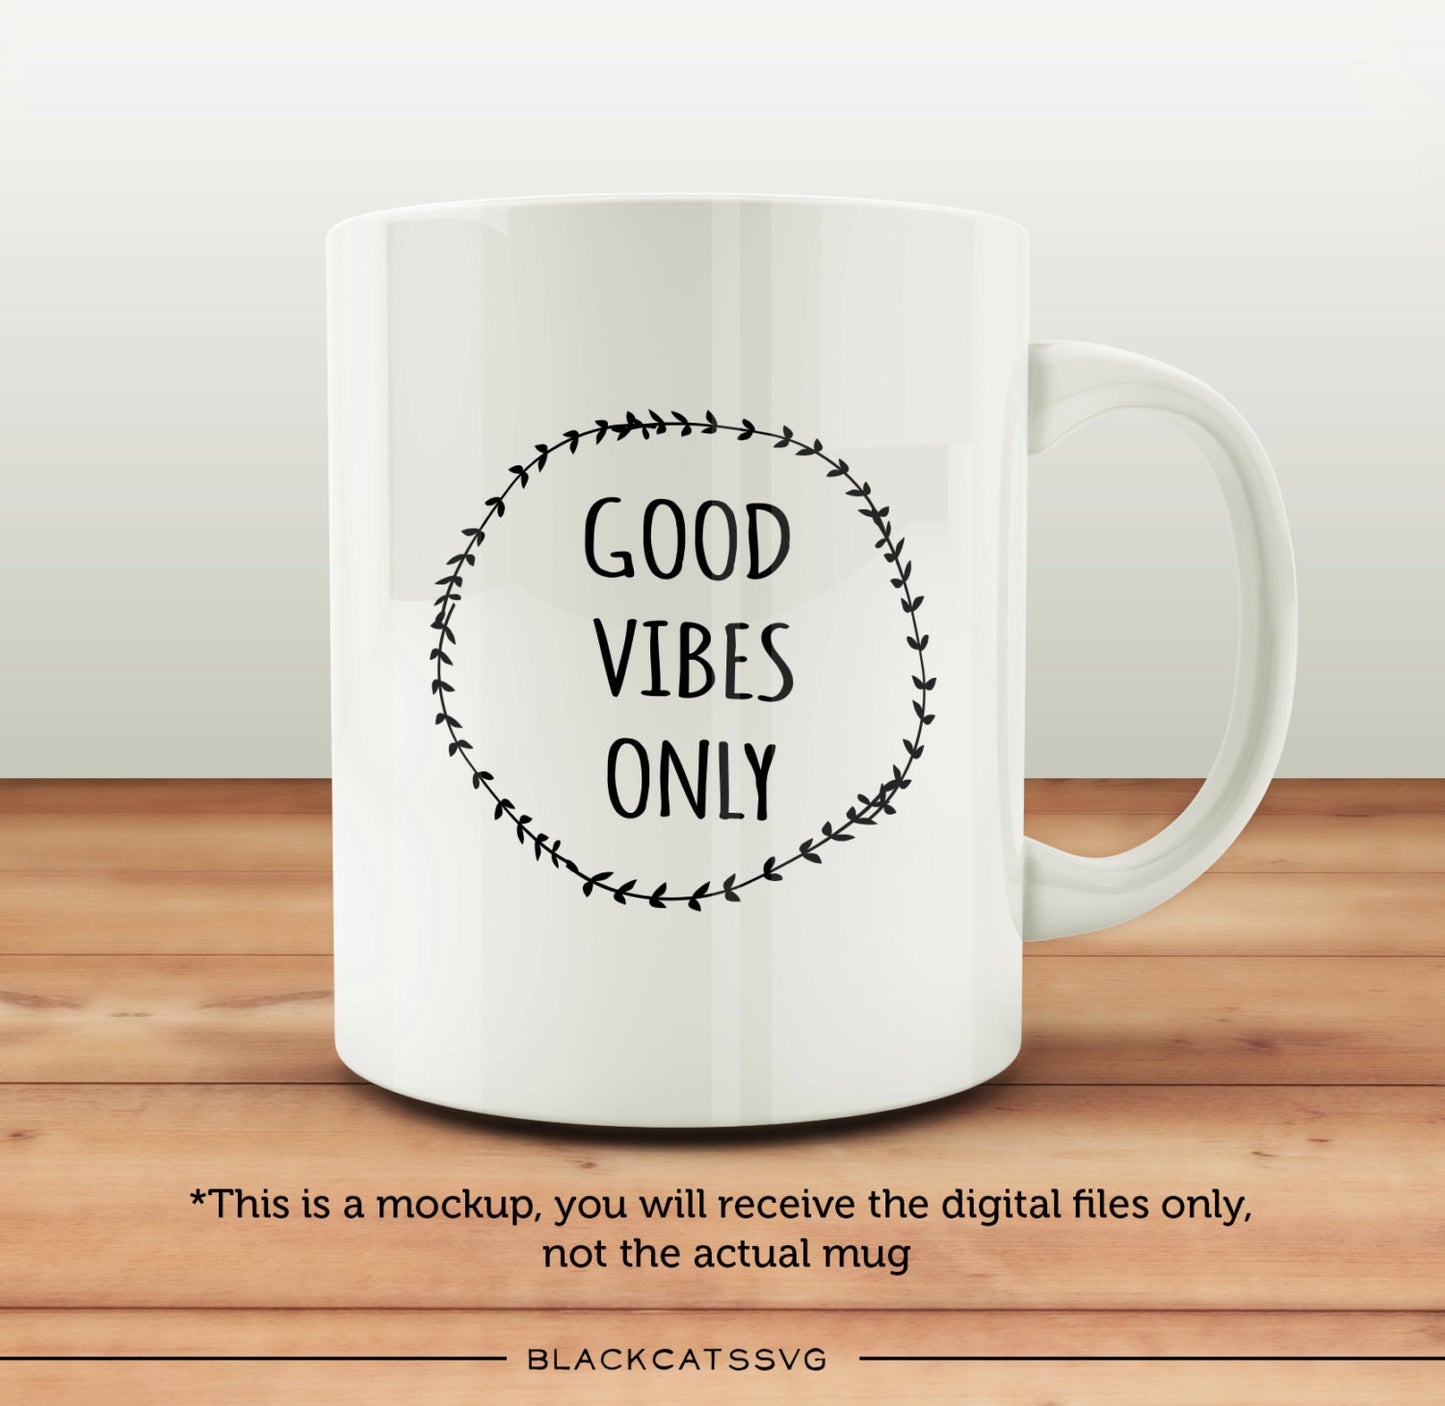 Good vibes only SVG file Cutting File Clipart in Svg, Eps, Dxf, Png for Cricut & Silhouette - BlackCatsSVG